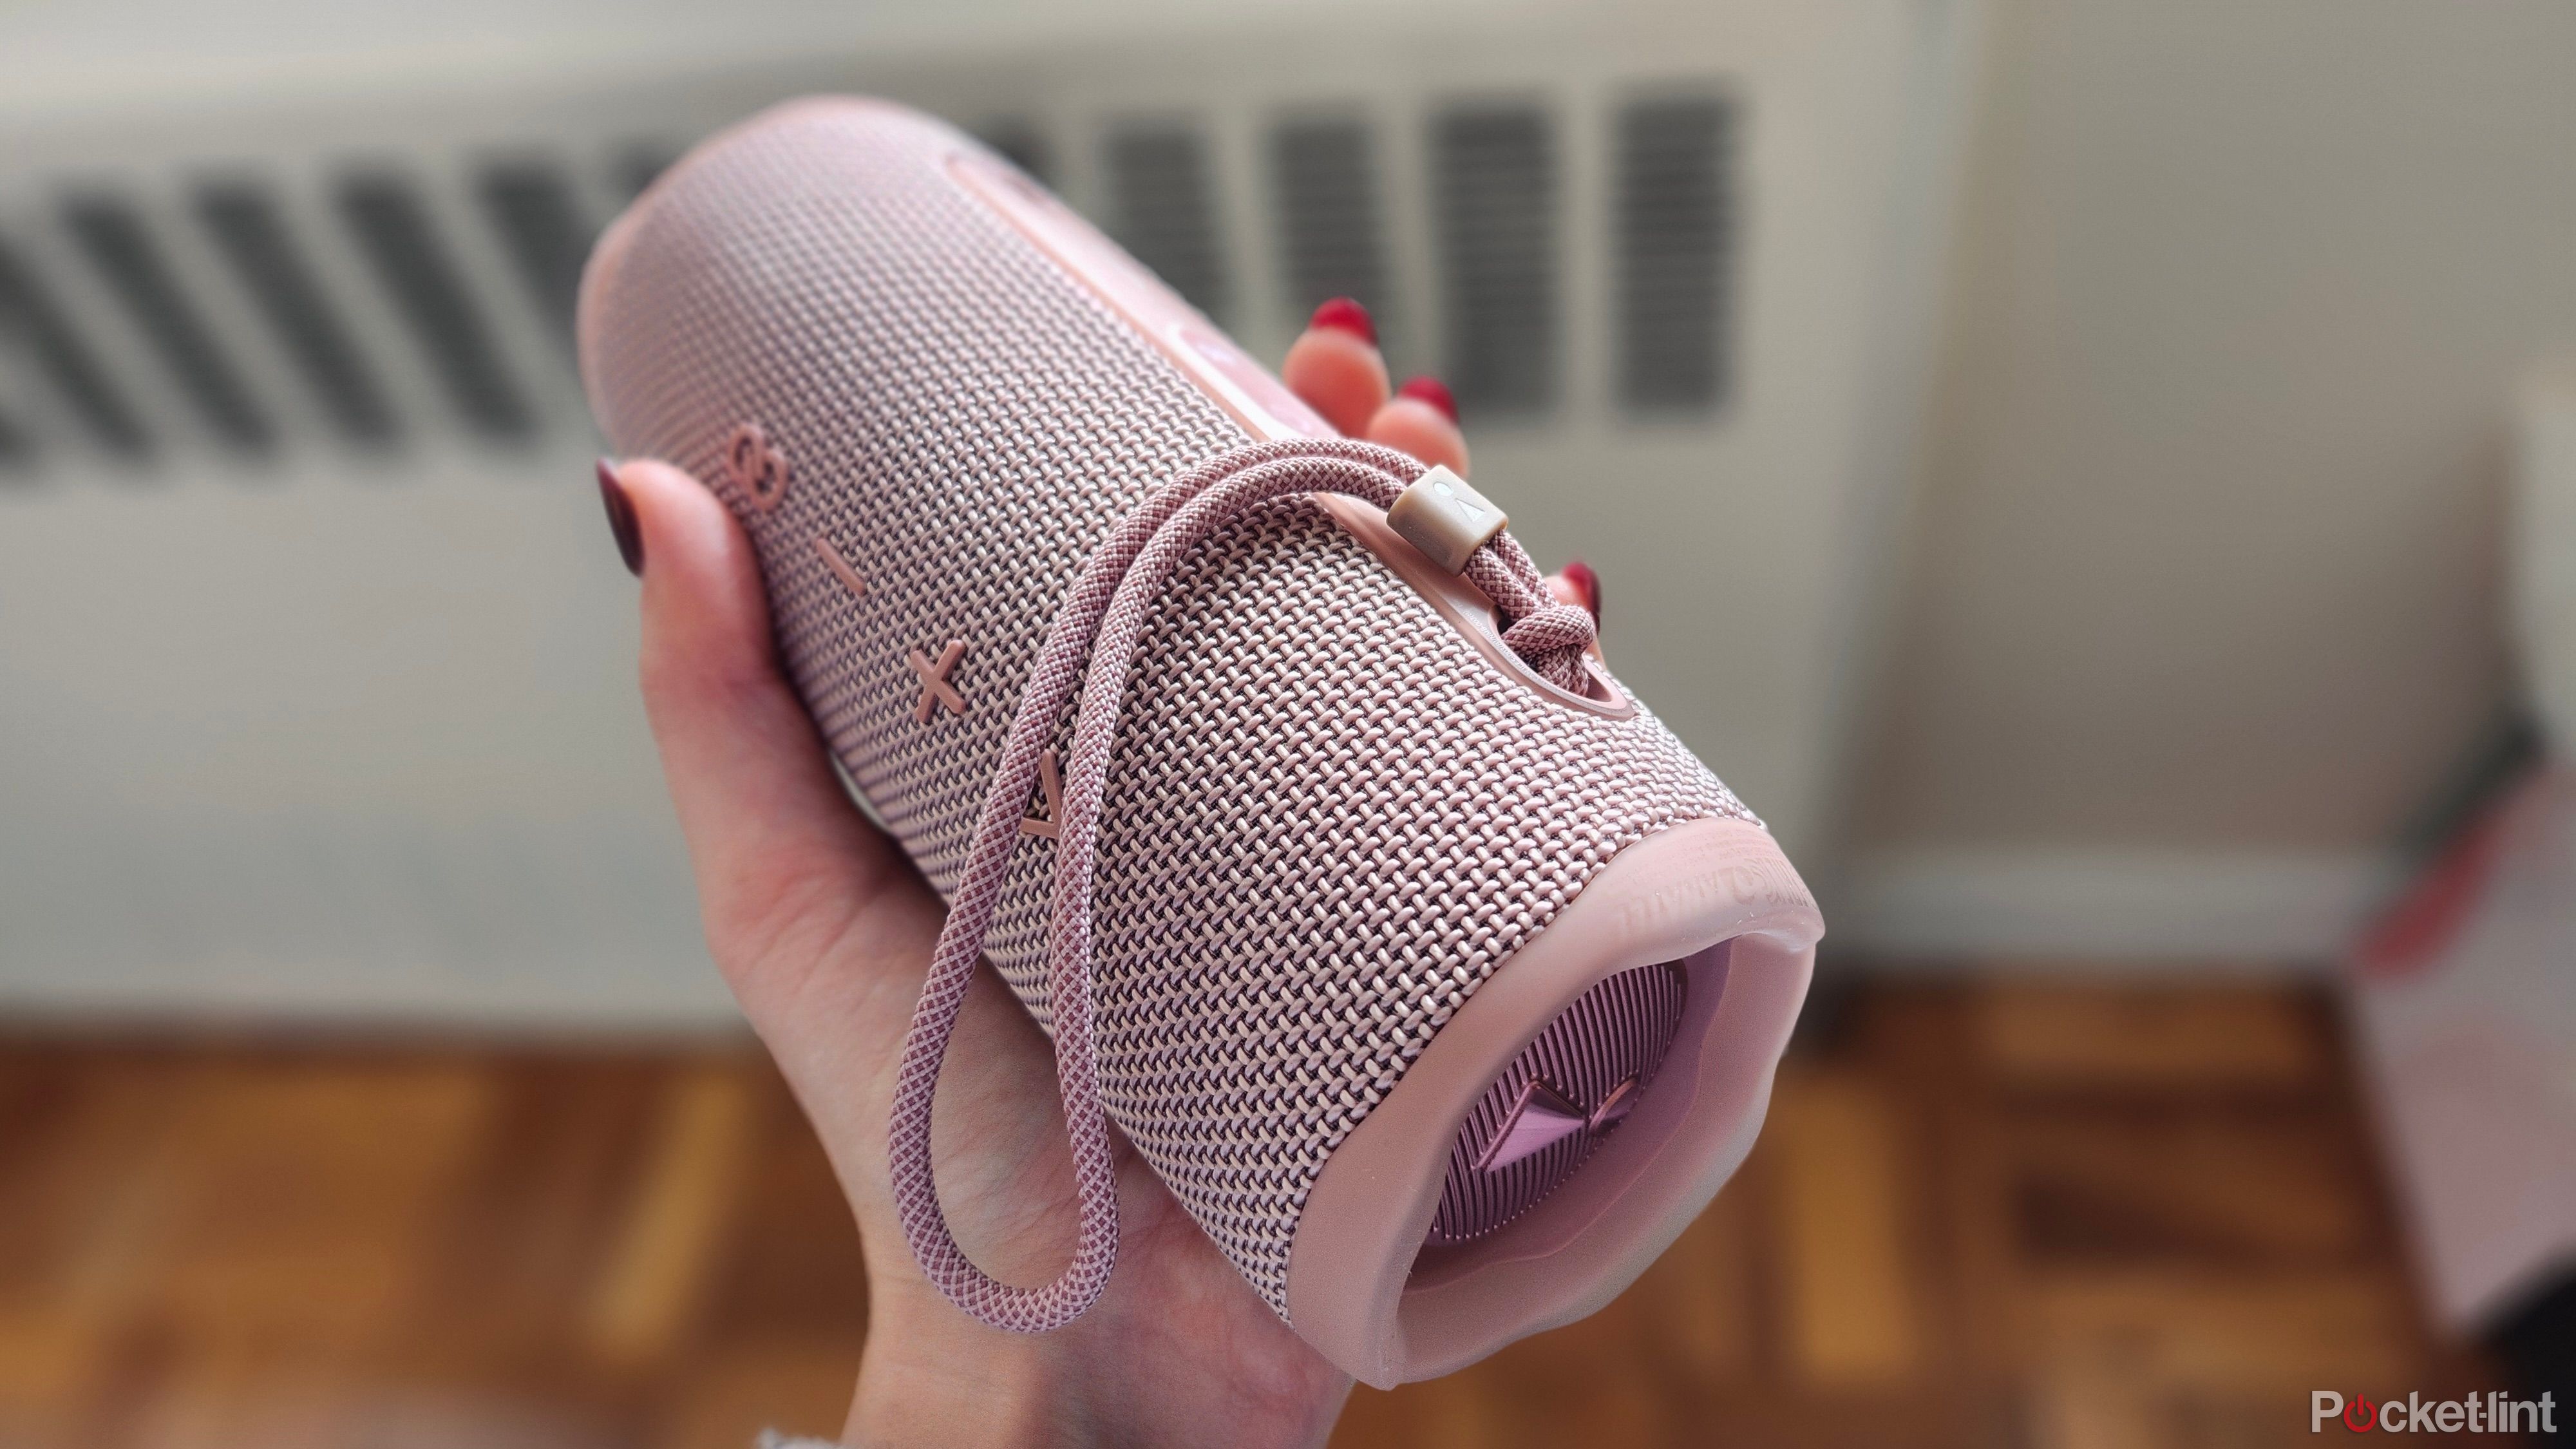 A person holding a pink JBL Flip 6